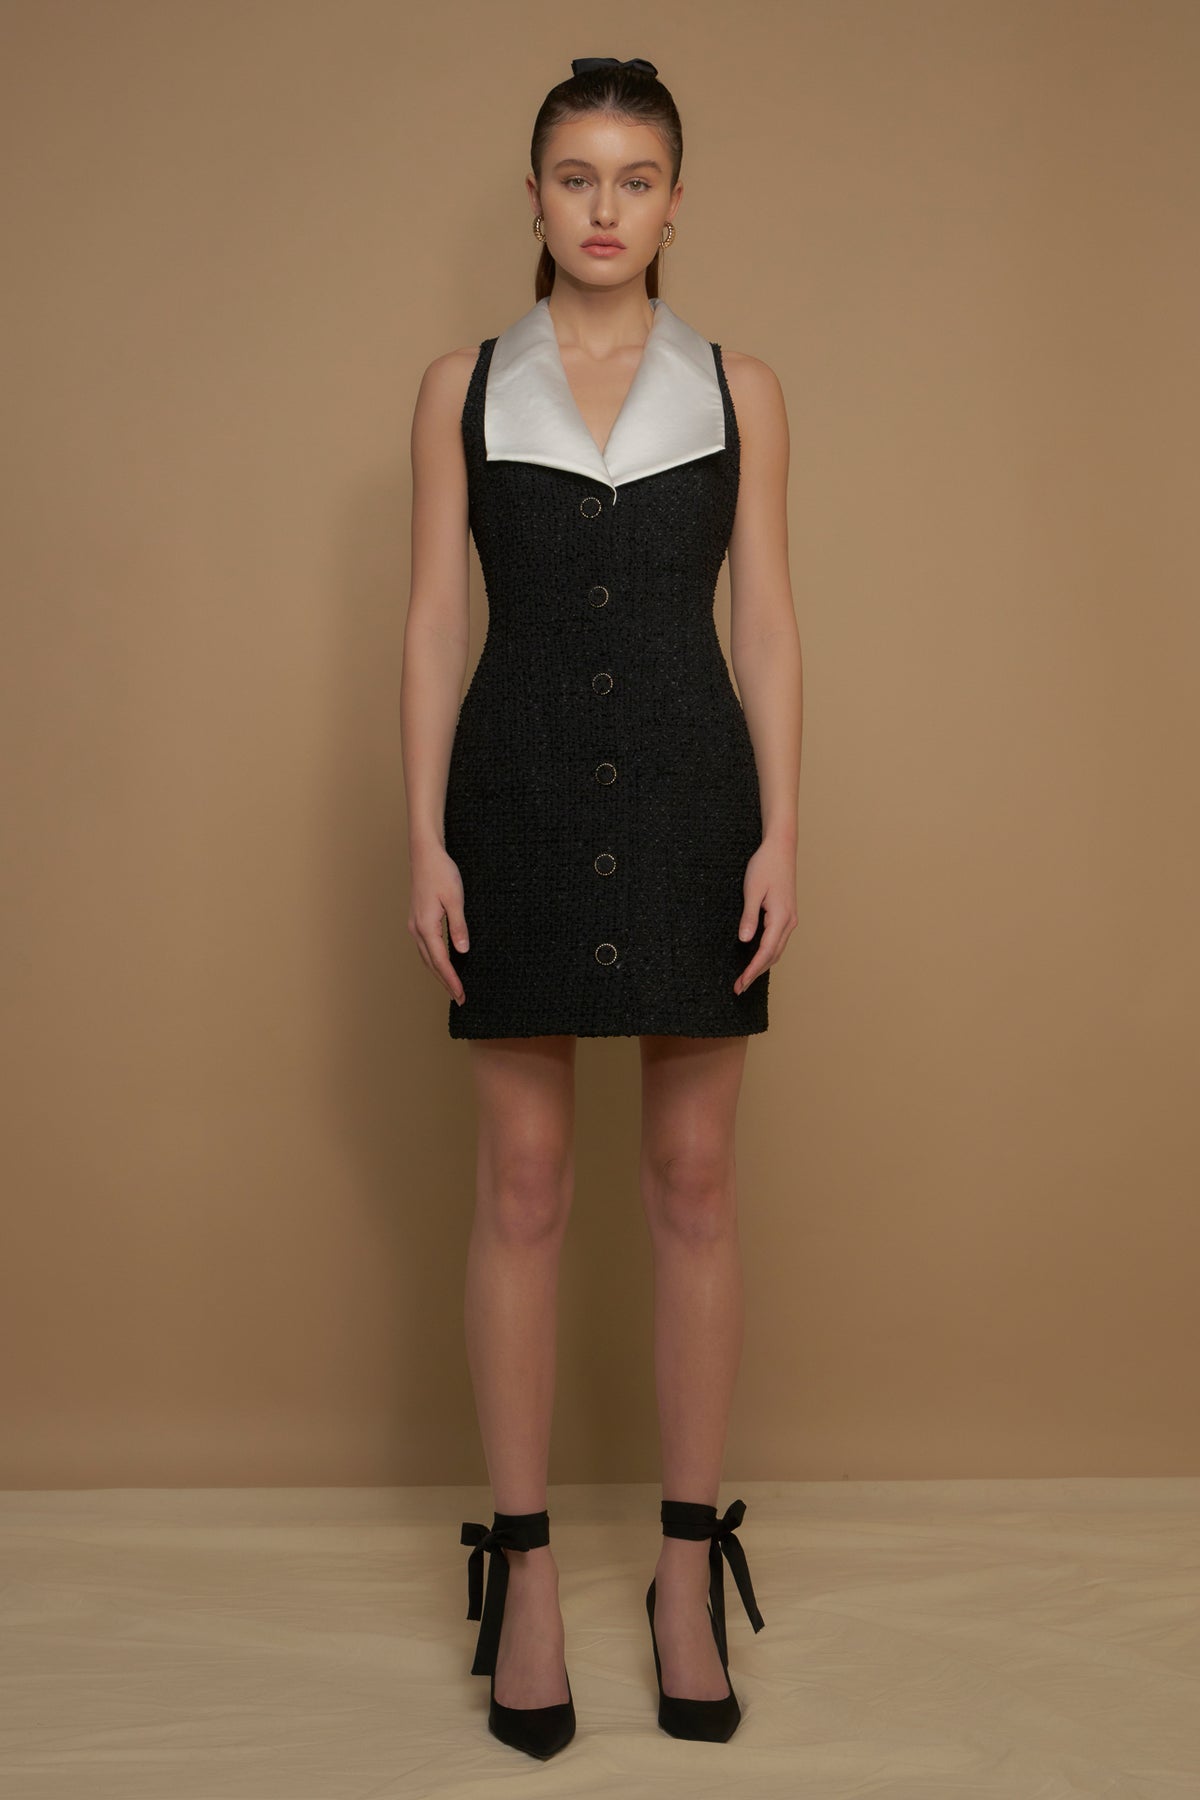 ENDLESS ROSE - Premium Sleeveless Tweed Mini Dress - DRESSES available at Objectrare